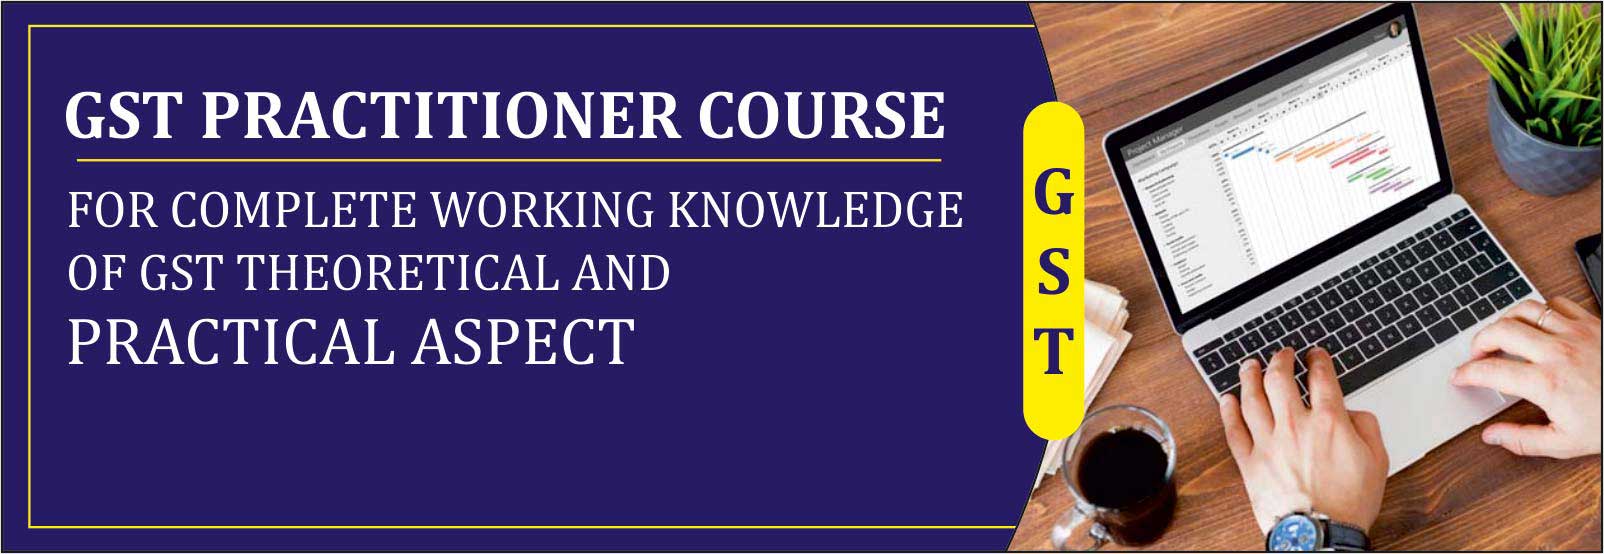 Gst Practitioner Course - TIFA Education